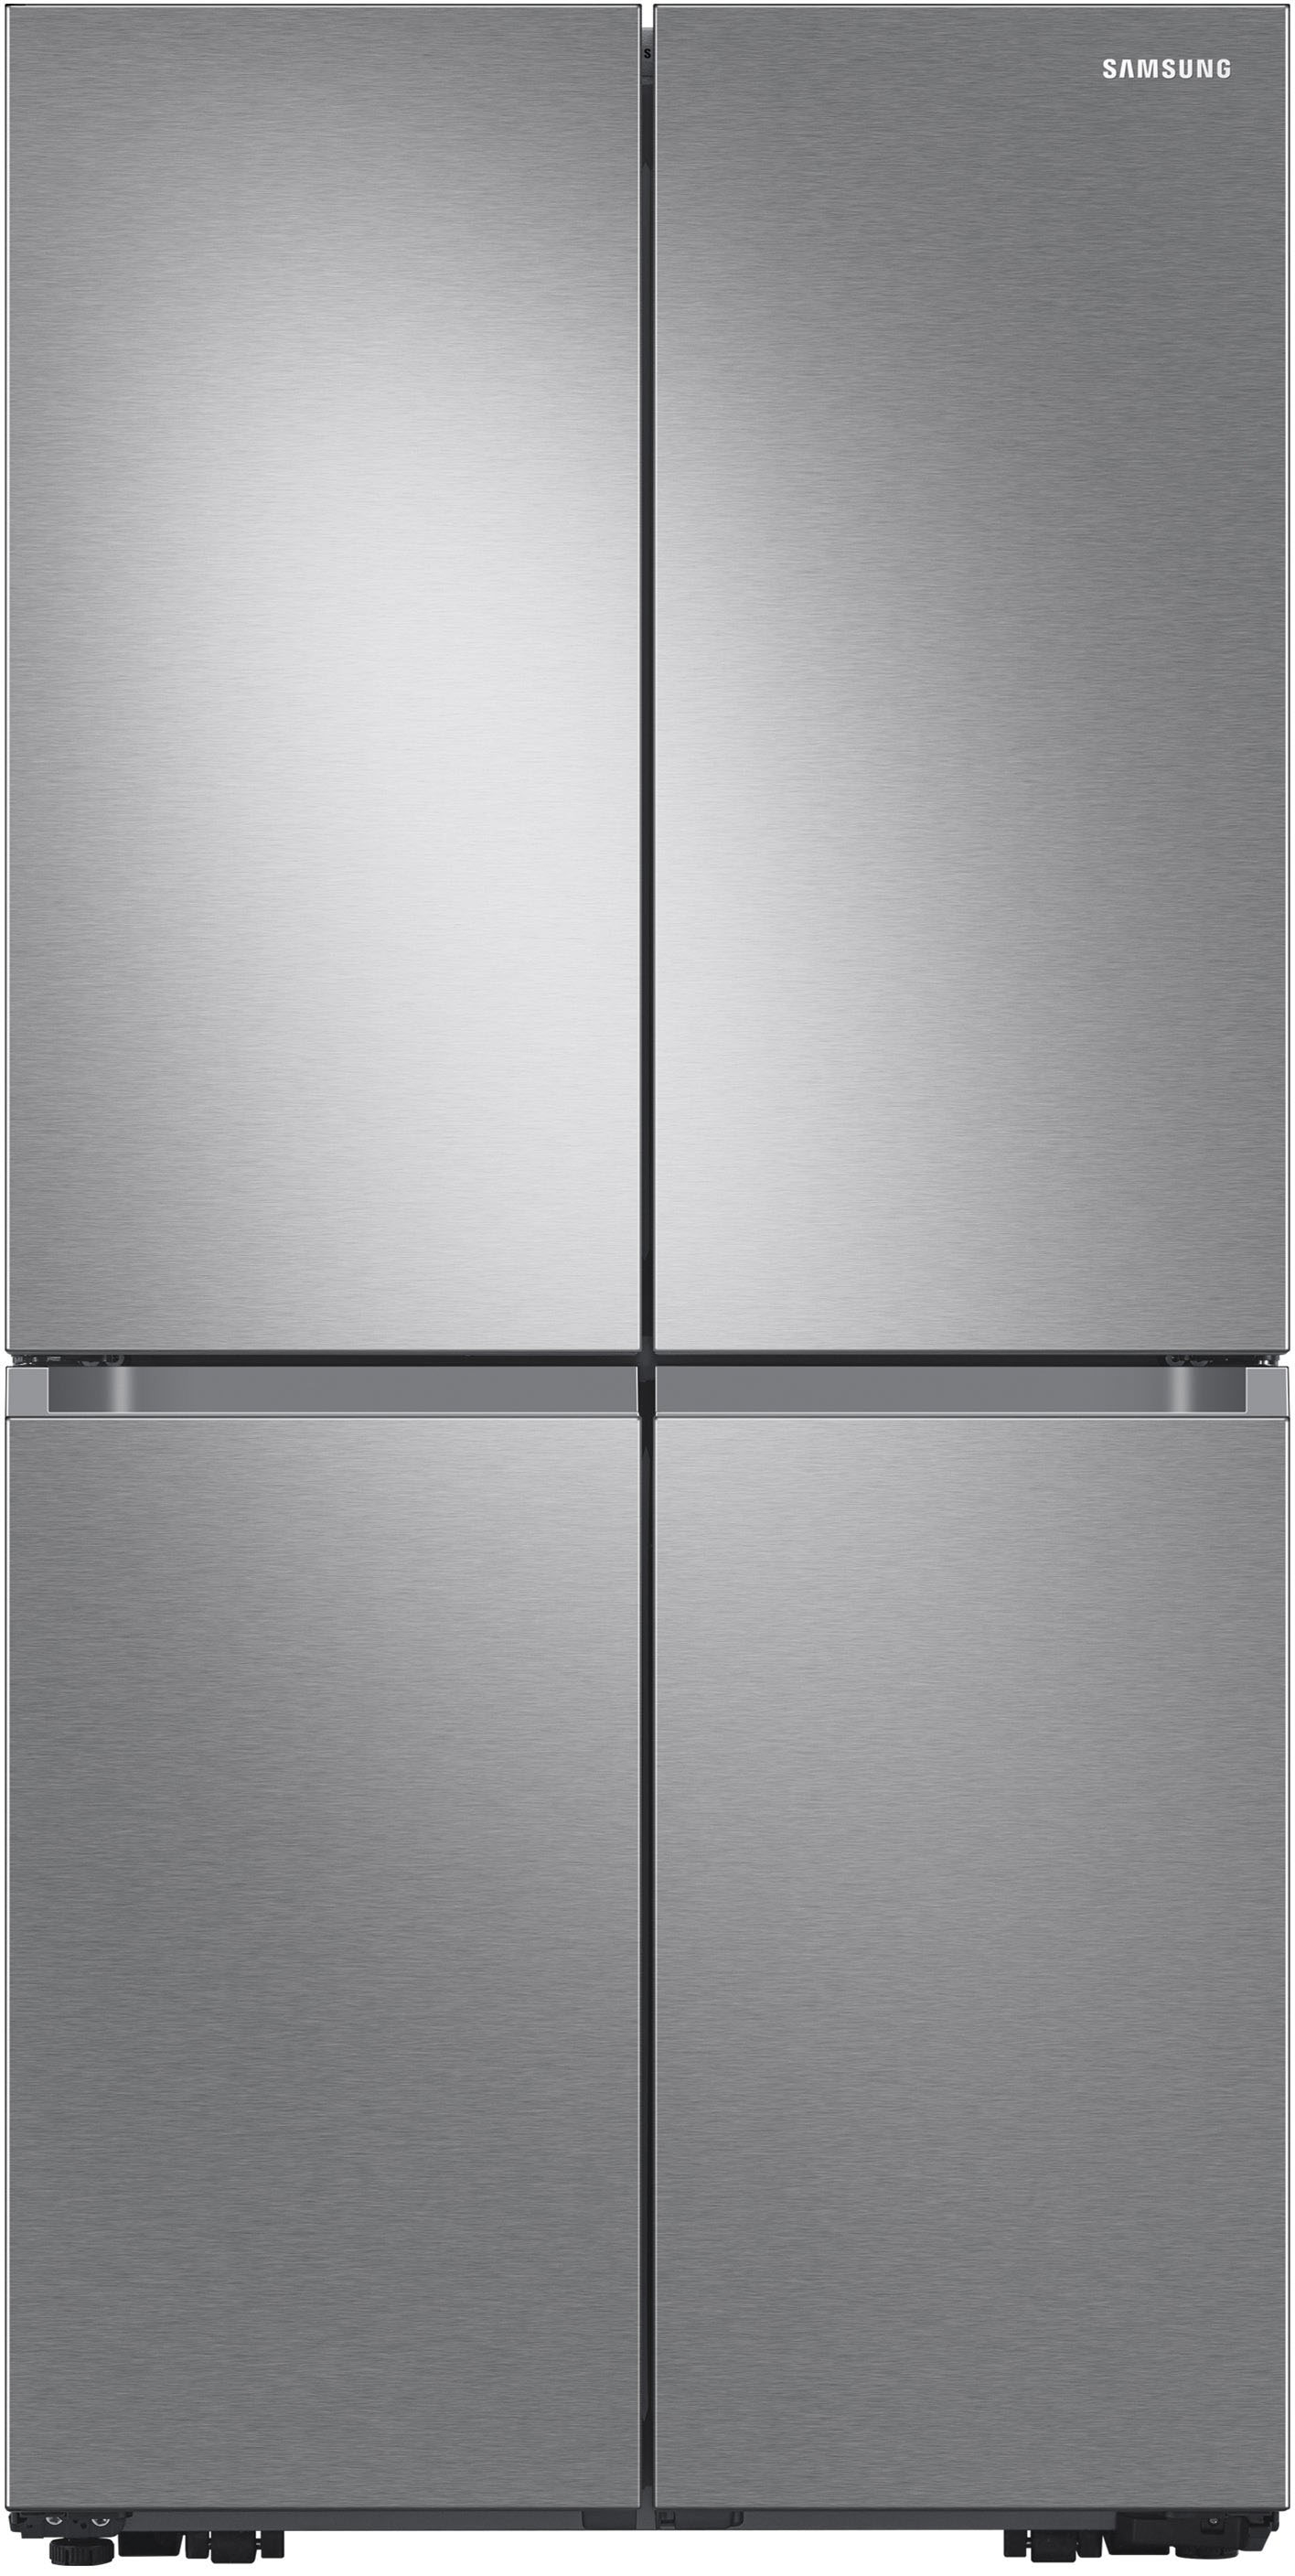 Samsung 29 cu. ft. Smart 4-Door Flex™ Refrigerator with AutoFill Water Pitcher and Dual Ice Maker in Stainless Steel